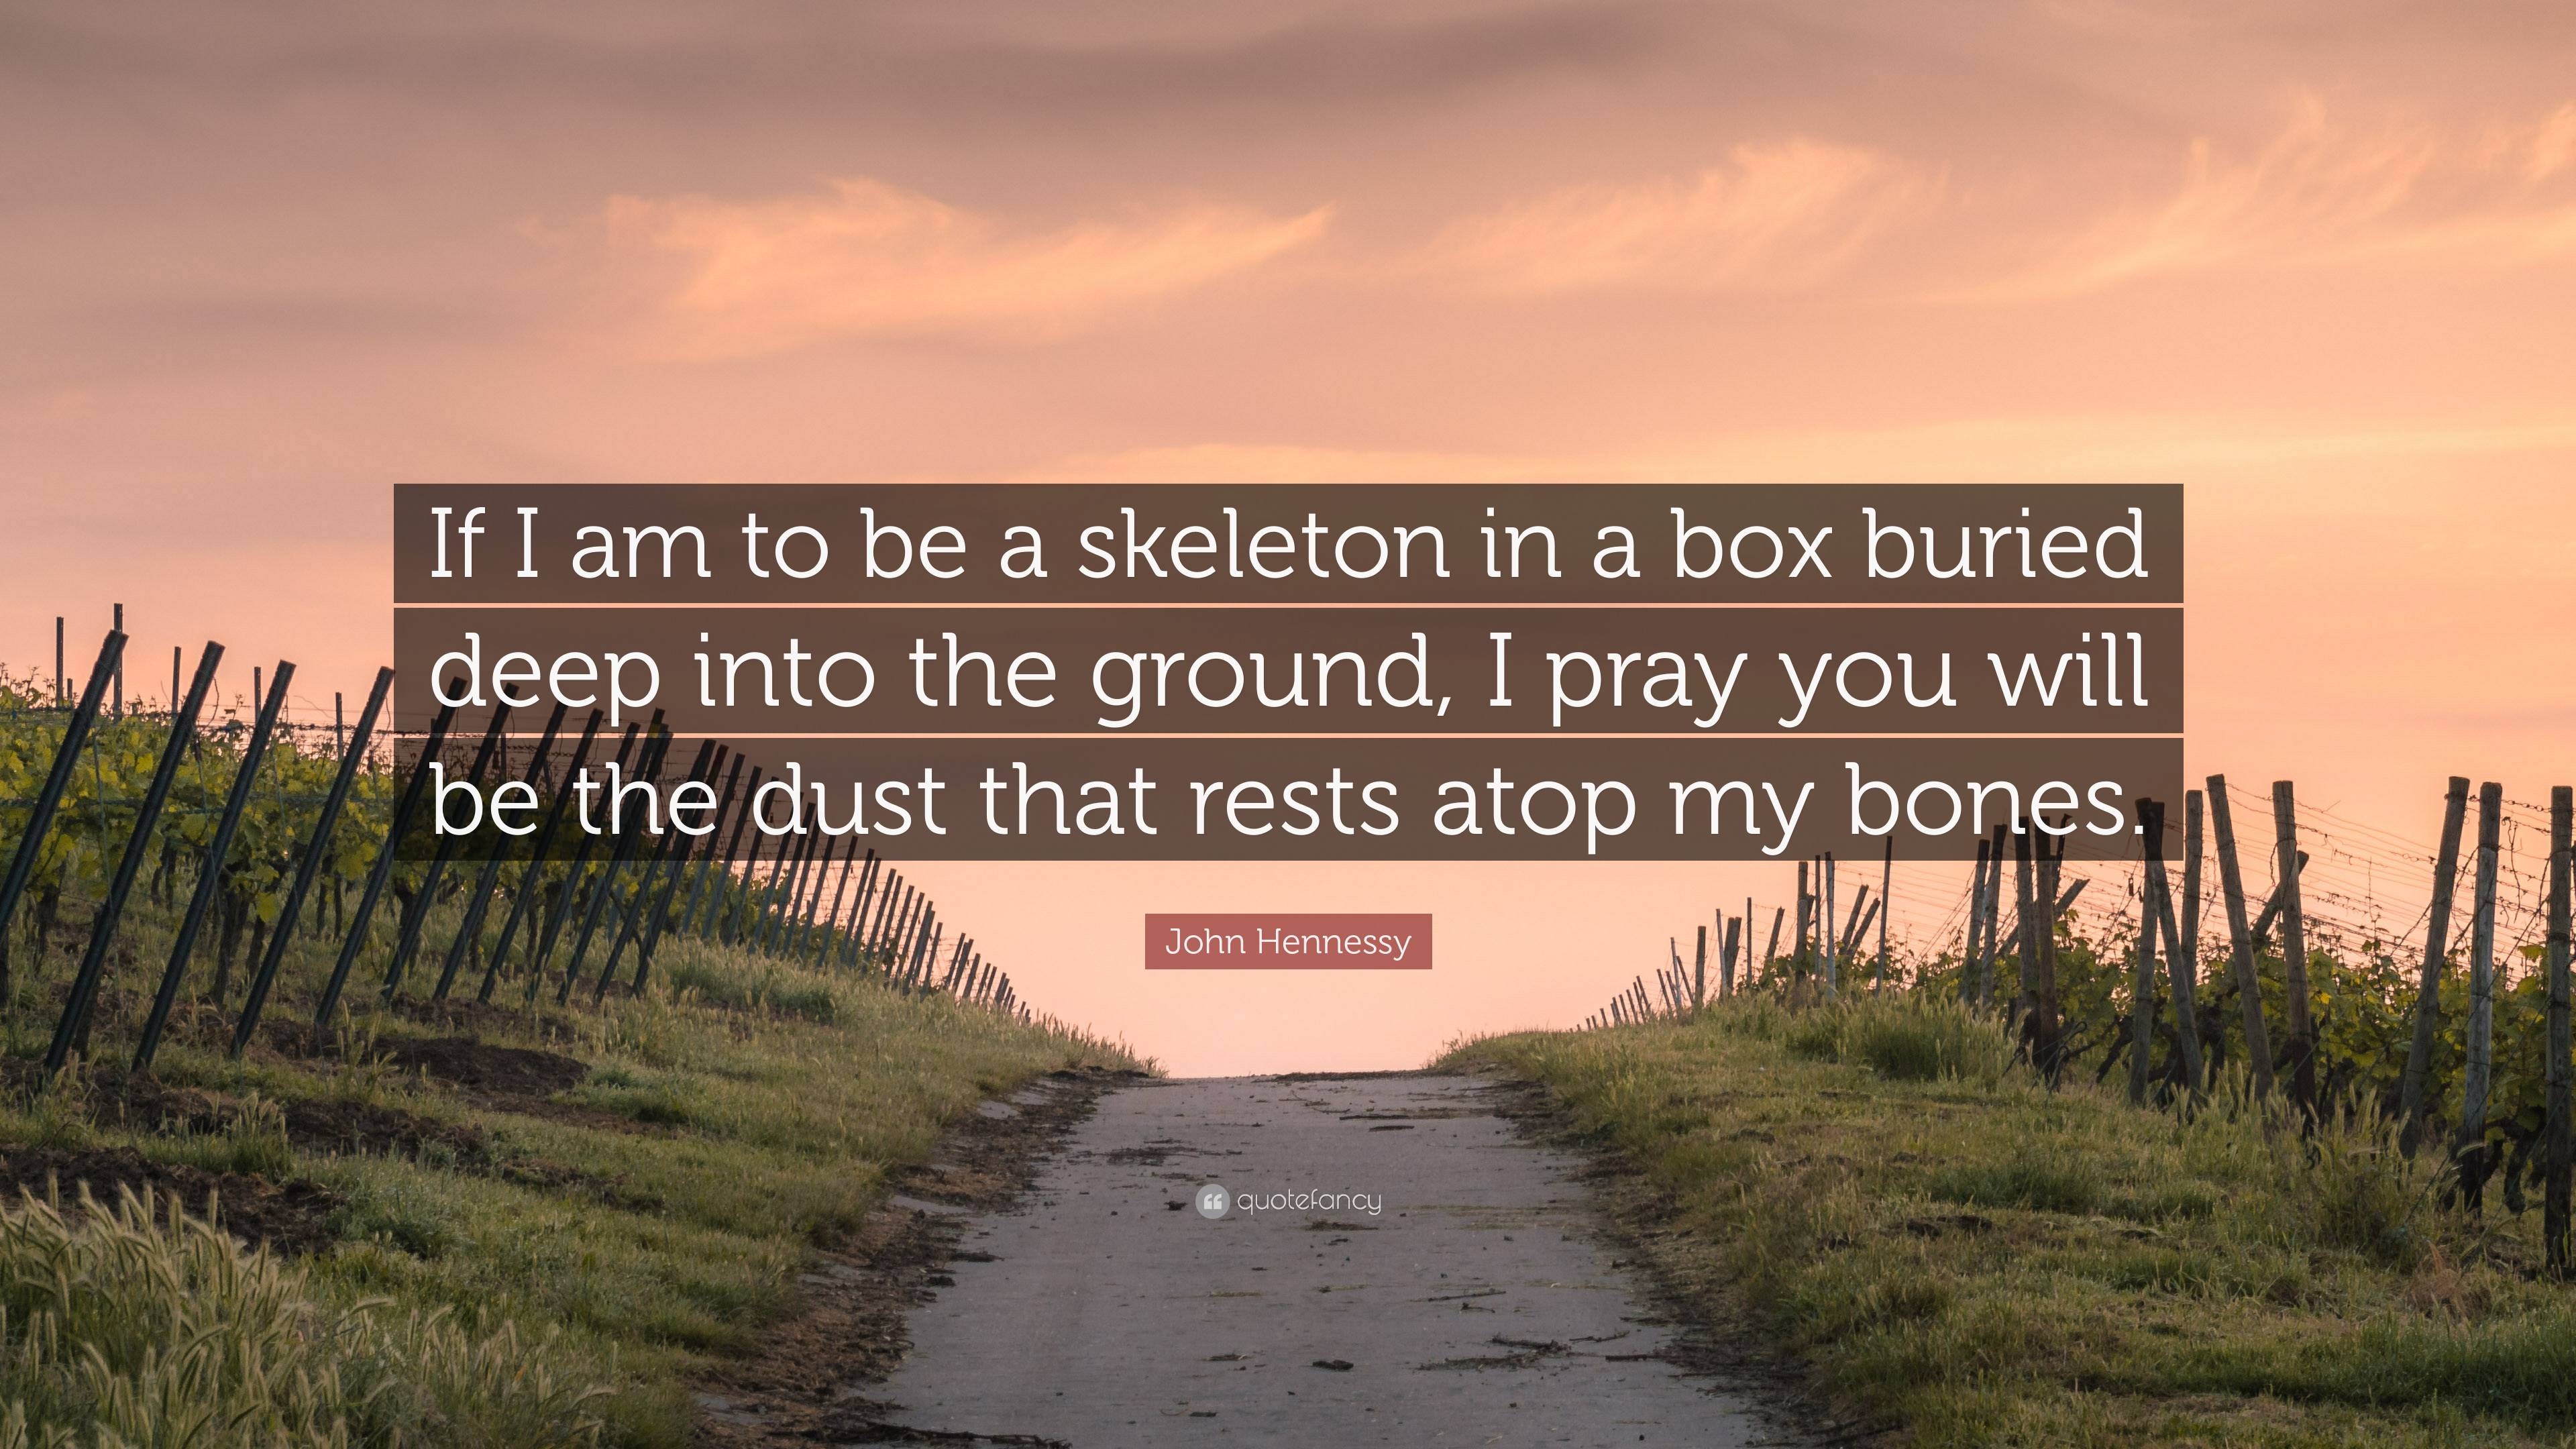 John Hennessy Quote: “If I am to be a skeleton in a box buried deep ...